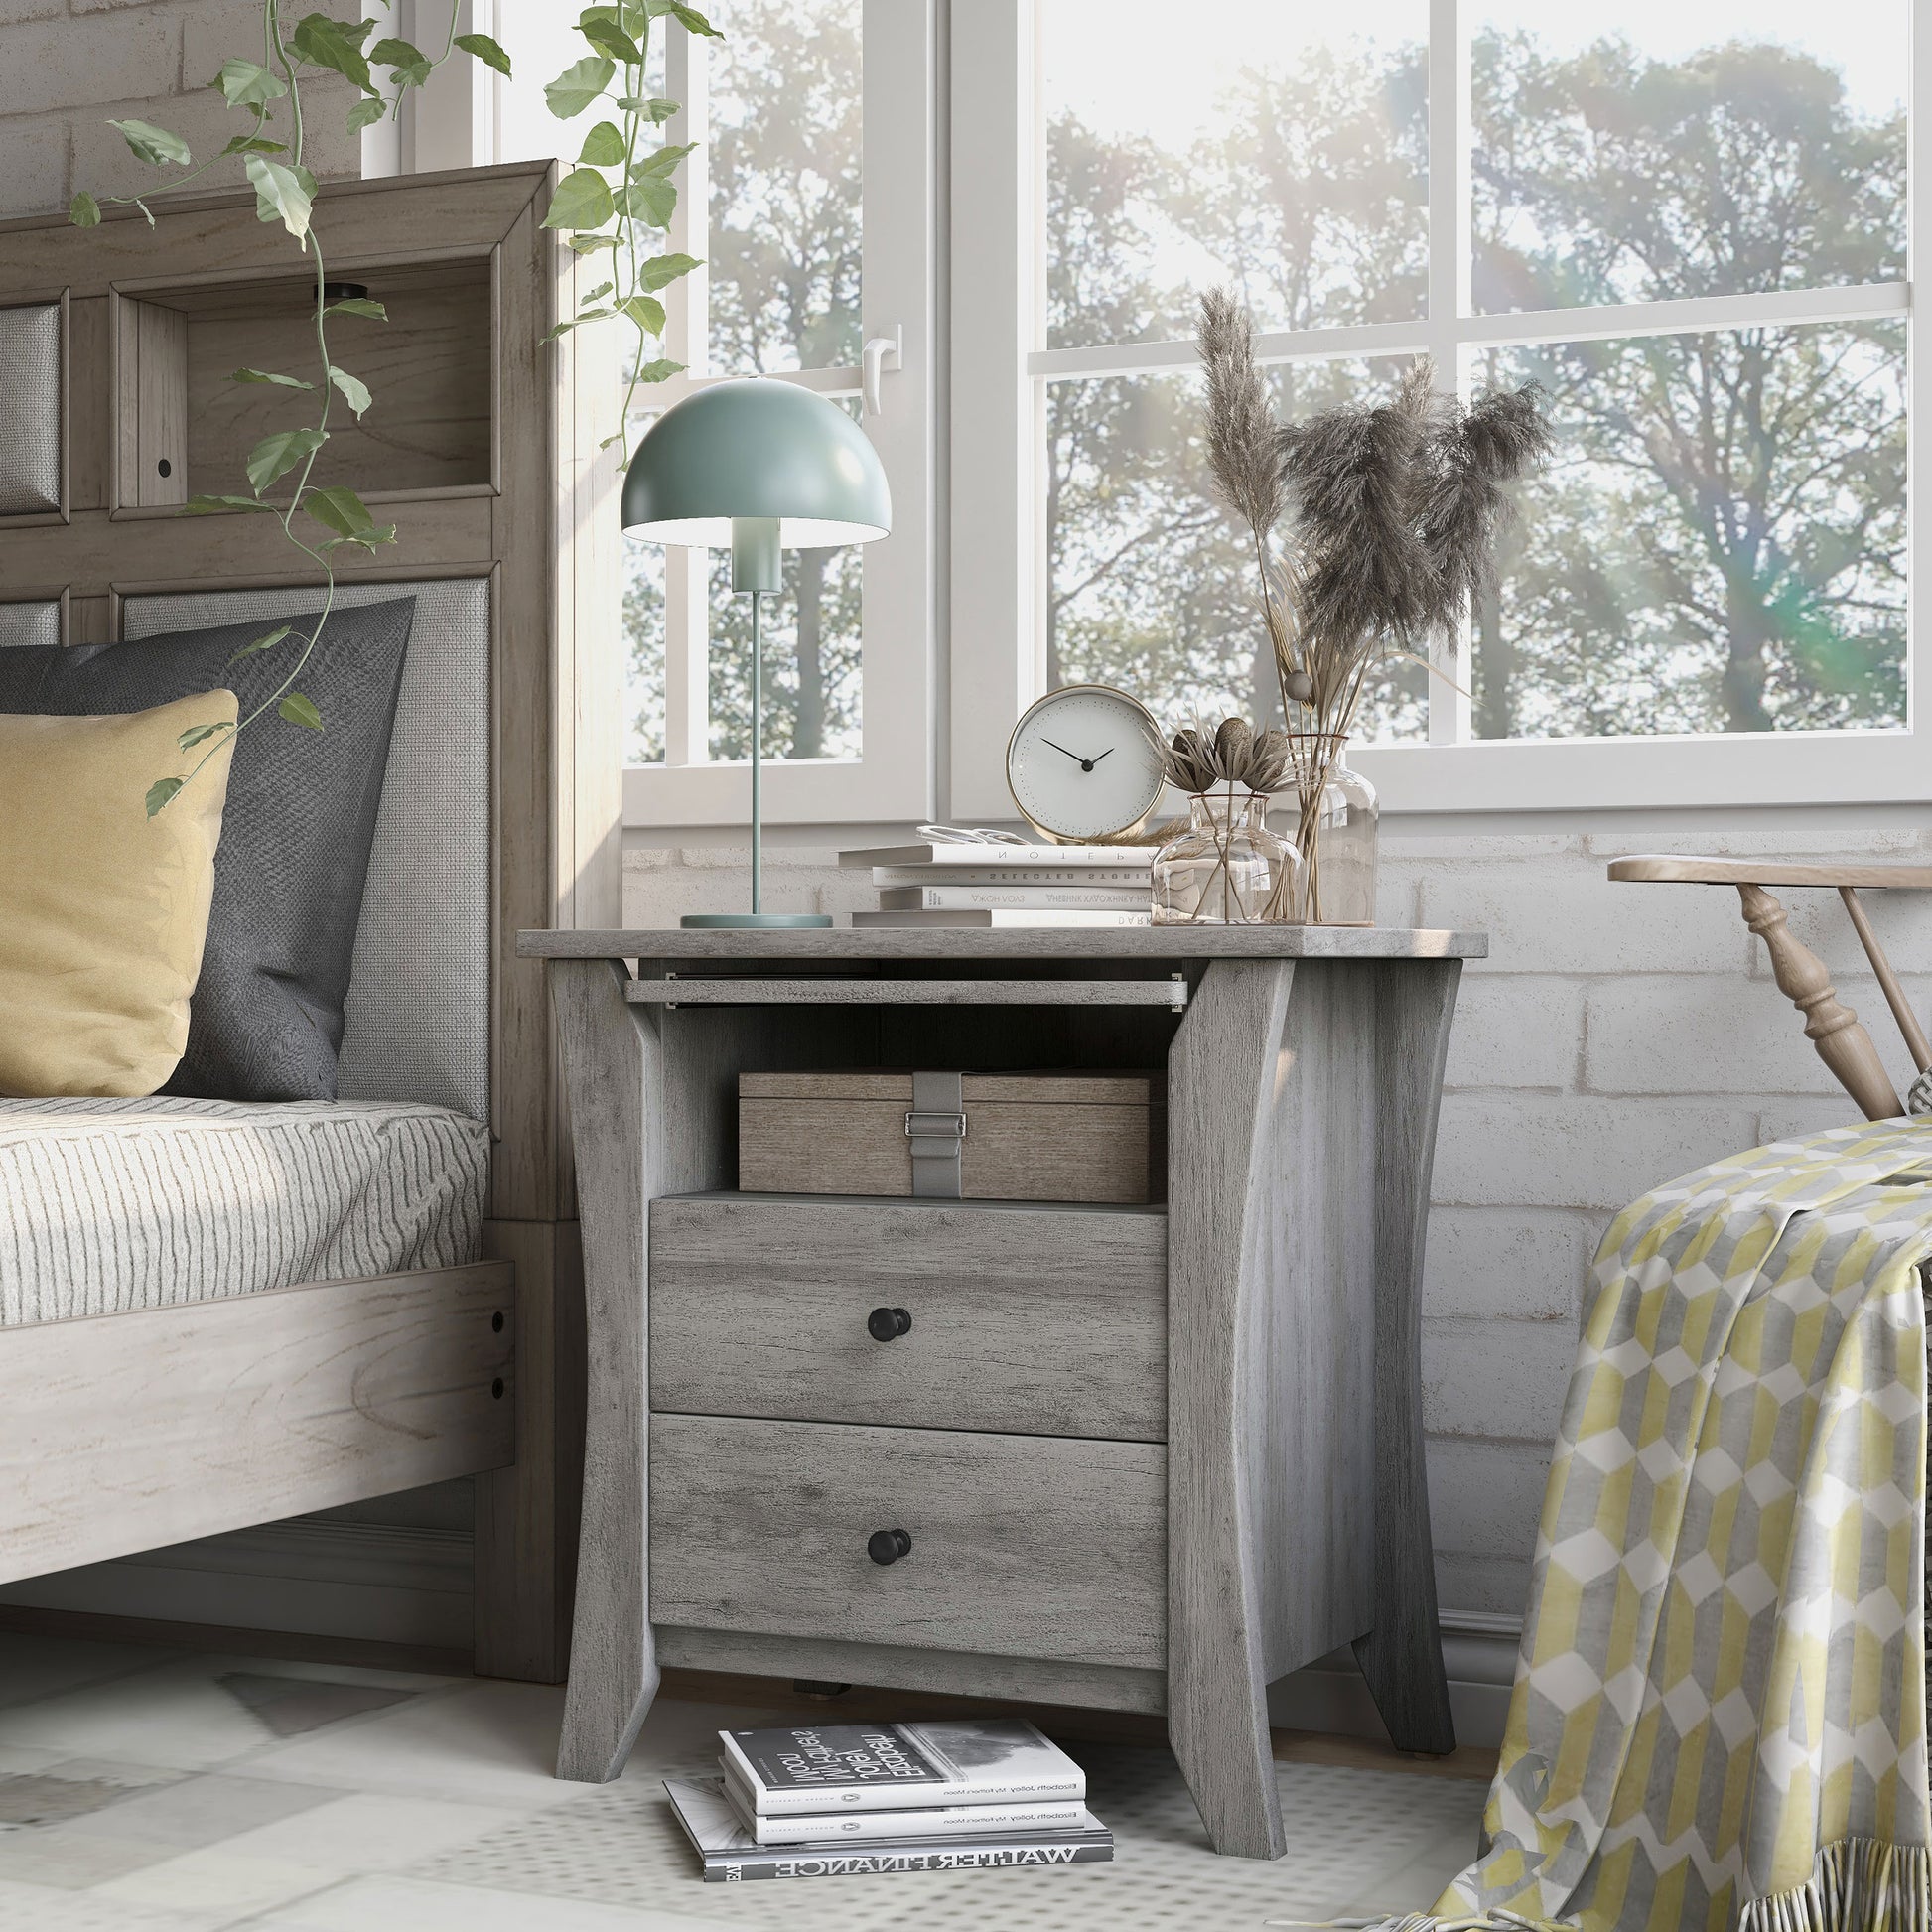 Left angled transitional vintage gray oak two-drawer one-shelf nightstand in a bedroom with accessories